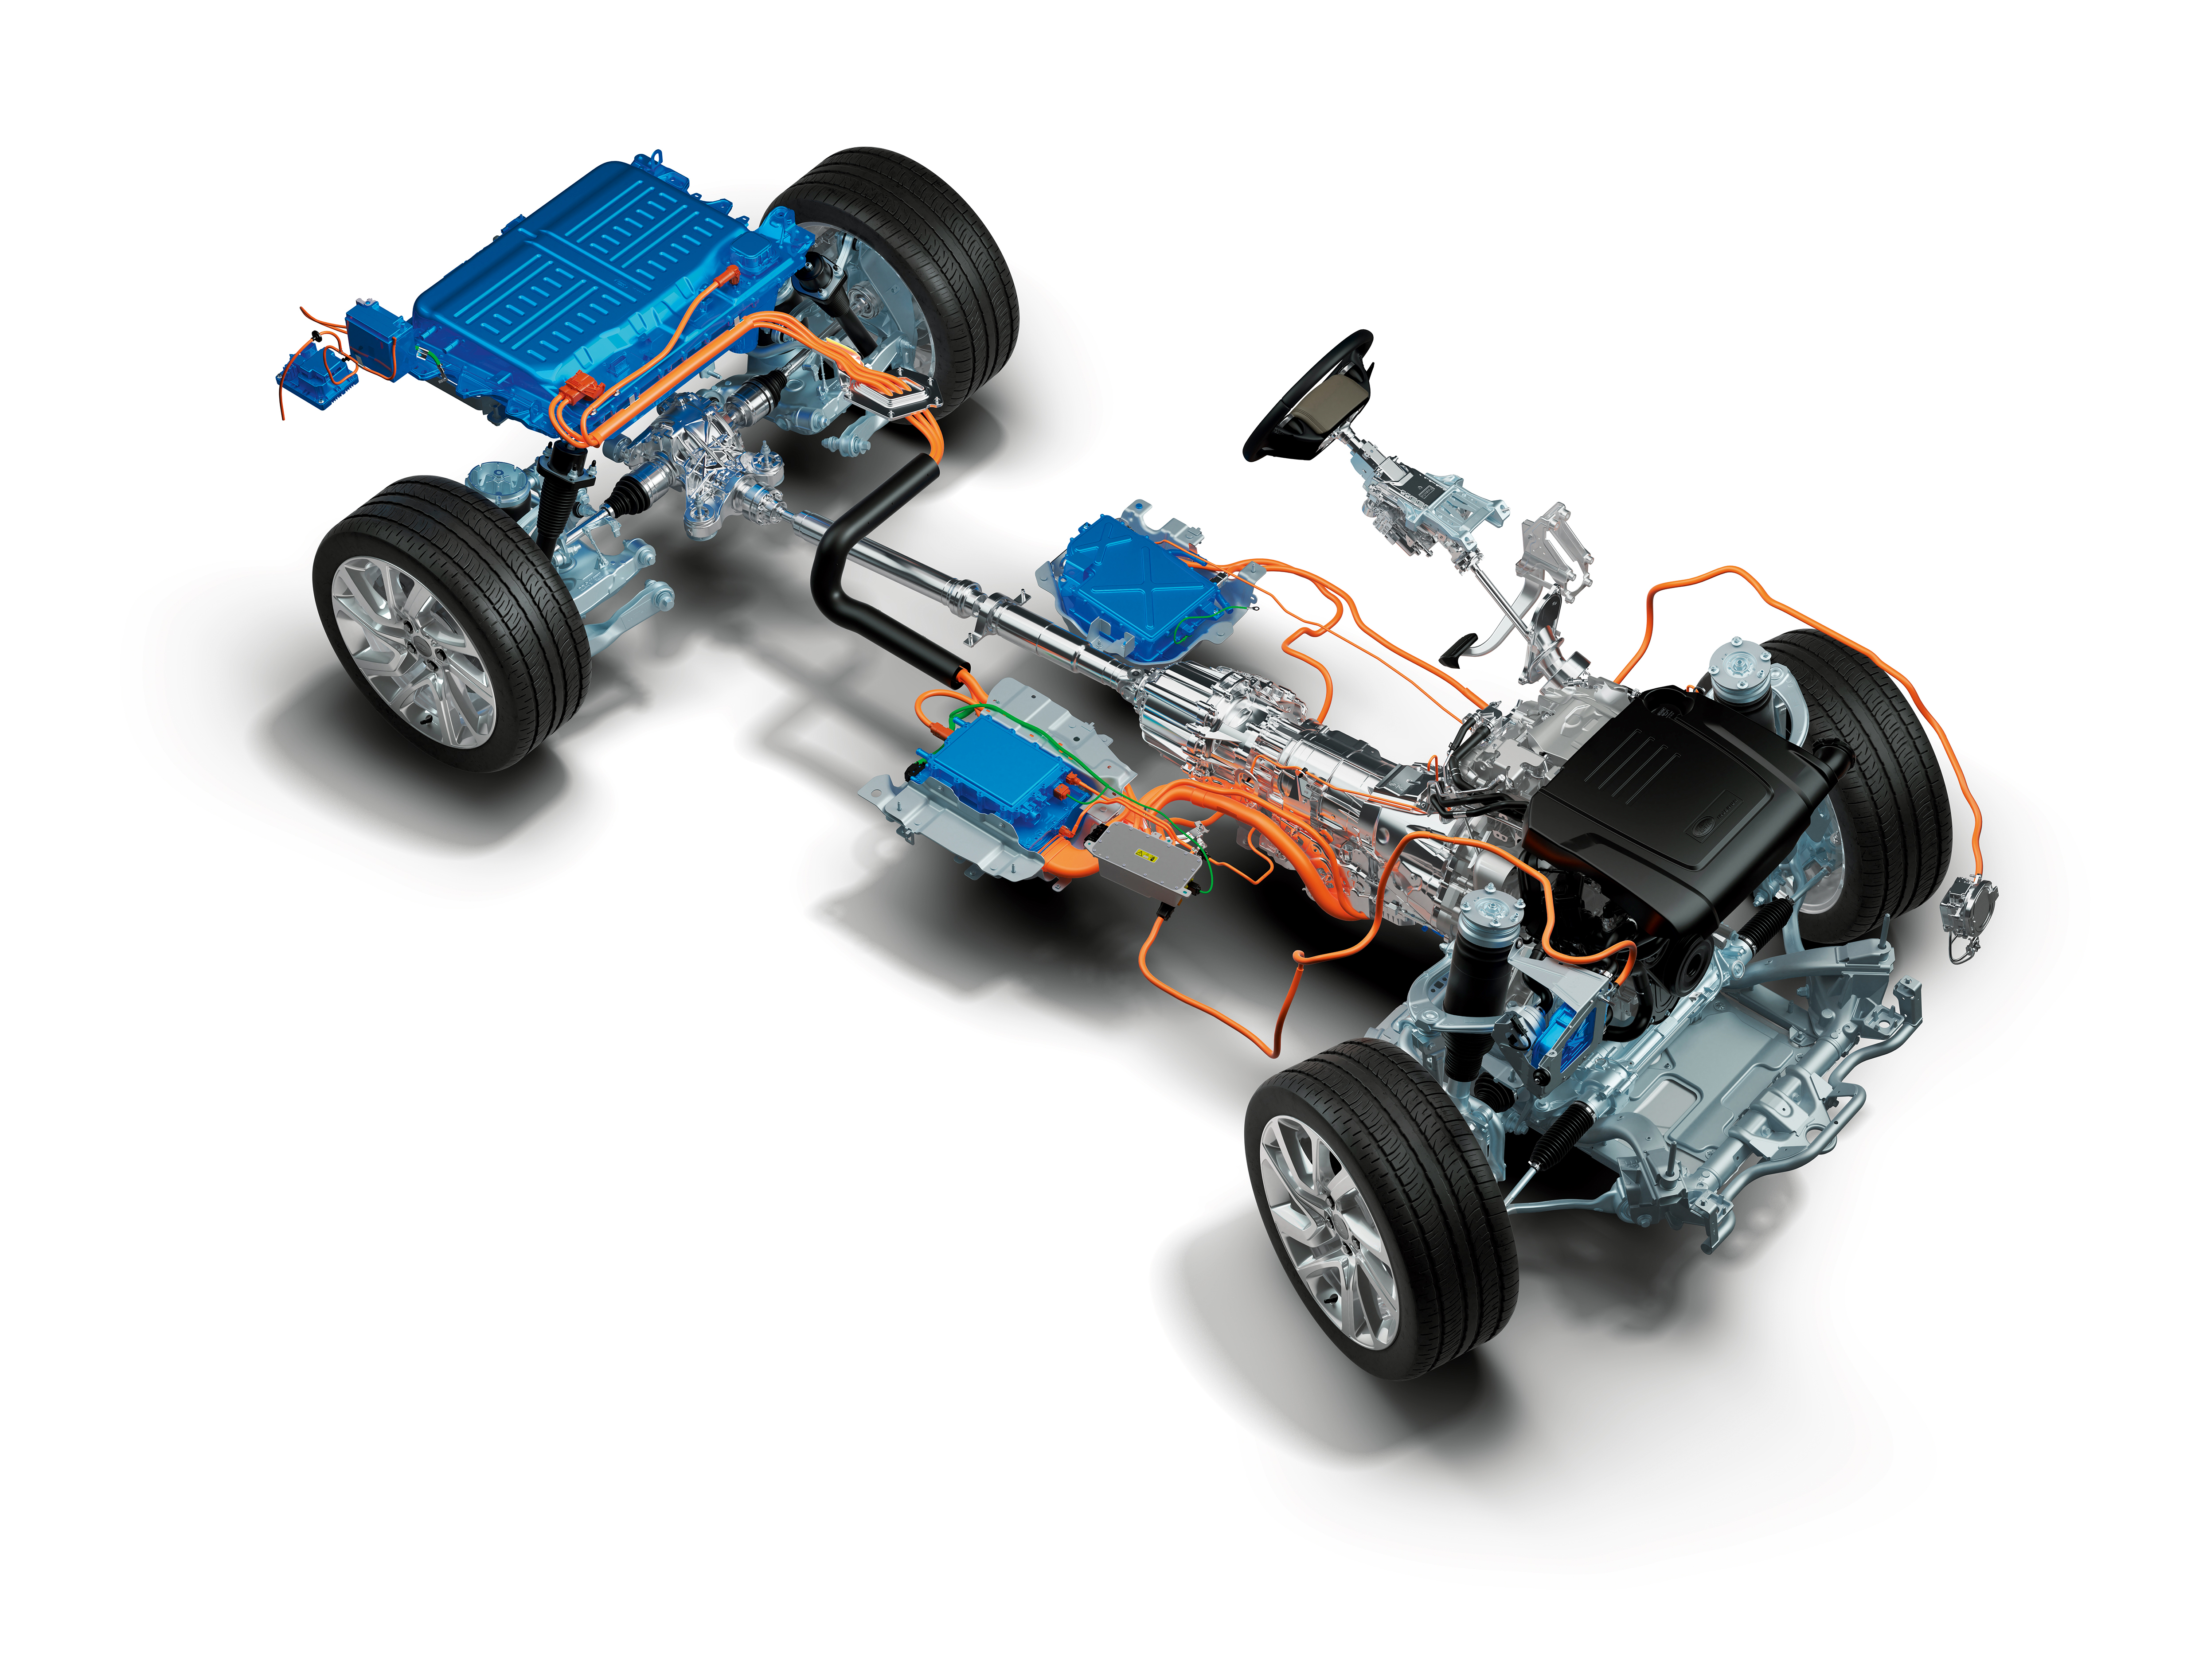 plug in hybrid electric vehicle definition